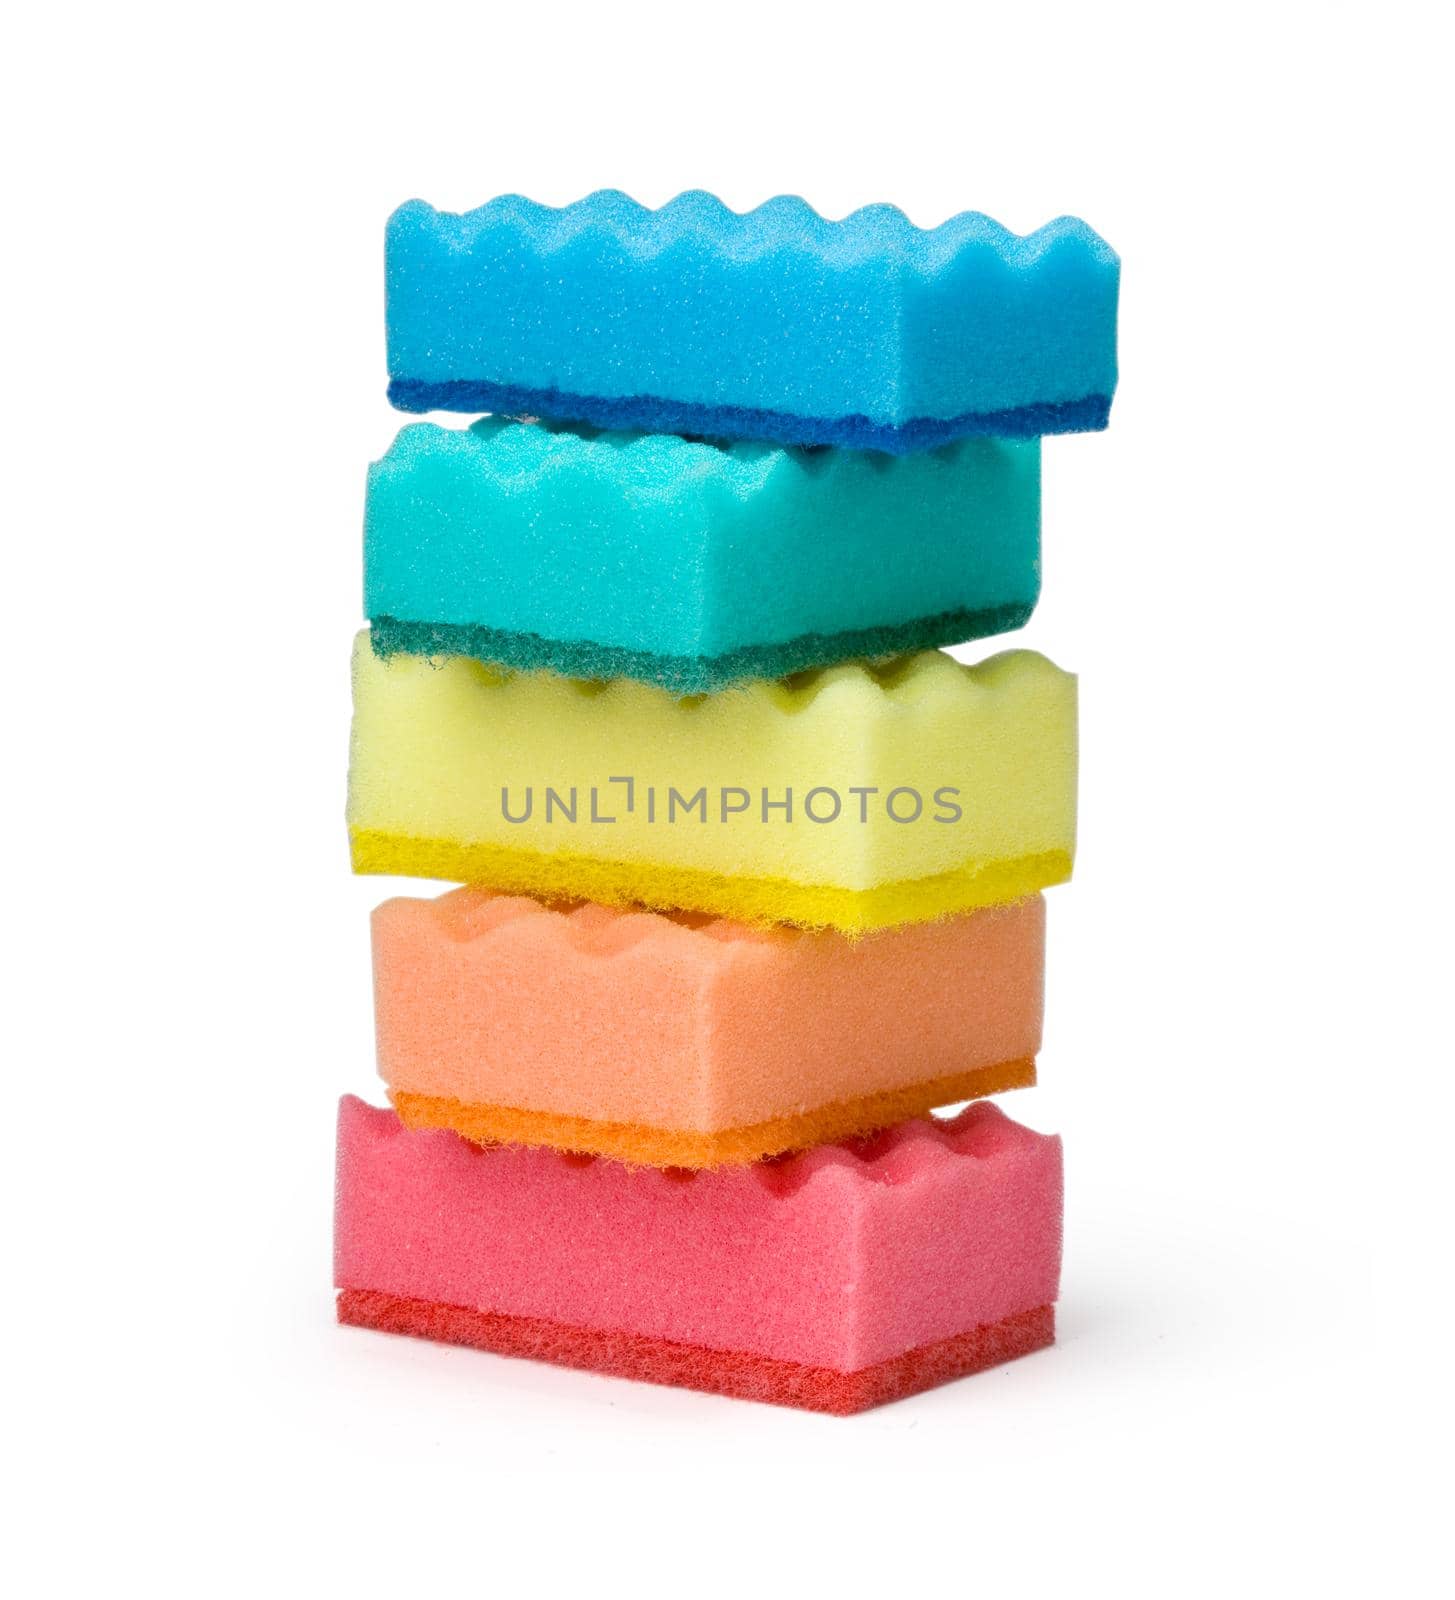 sponges on a white background